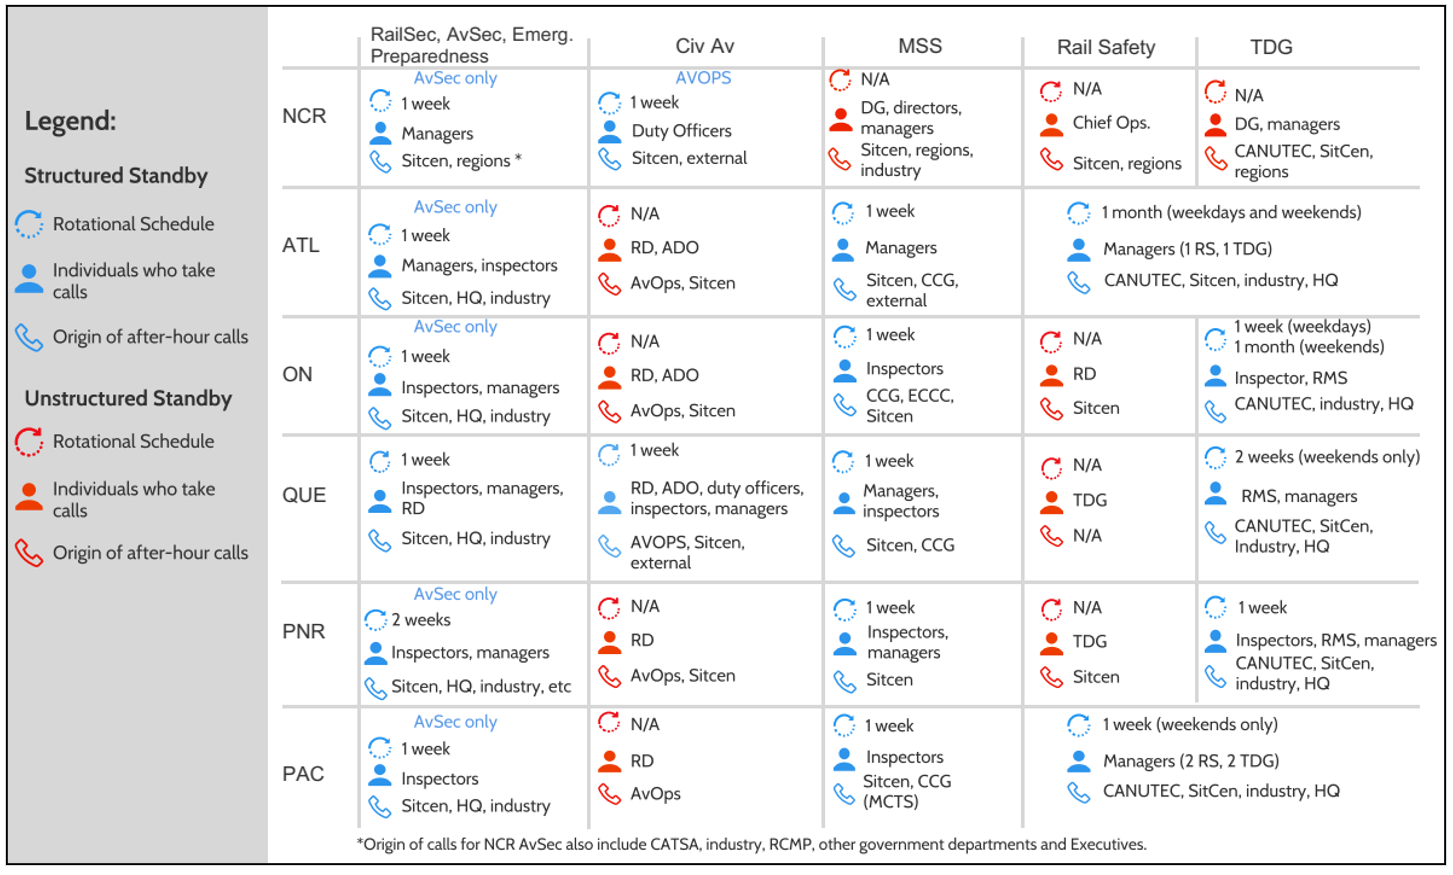 This table summarizes Safety and Security standby practices in the five Transport Canada regions, plus the National Capital Region (NCR), as well as most modes. For each mode in each region, it provides details on whether there is a structured or unstructured standby in place within that group, broken down by rotational schedule, individuals fielding calls, and origin of after-hour calls.